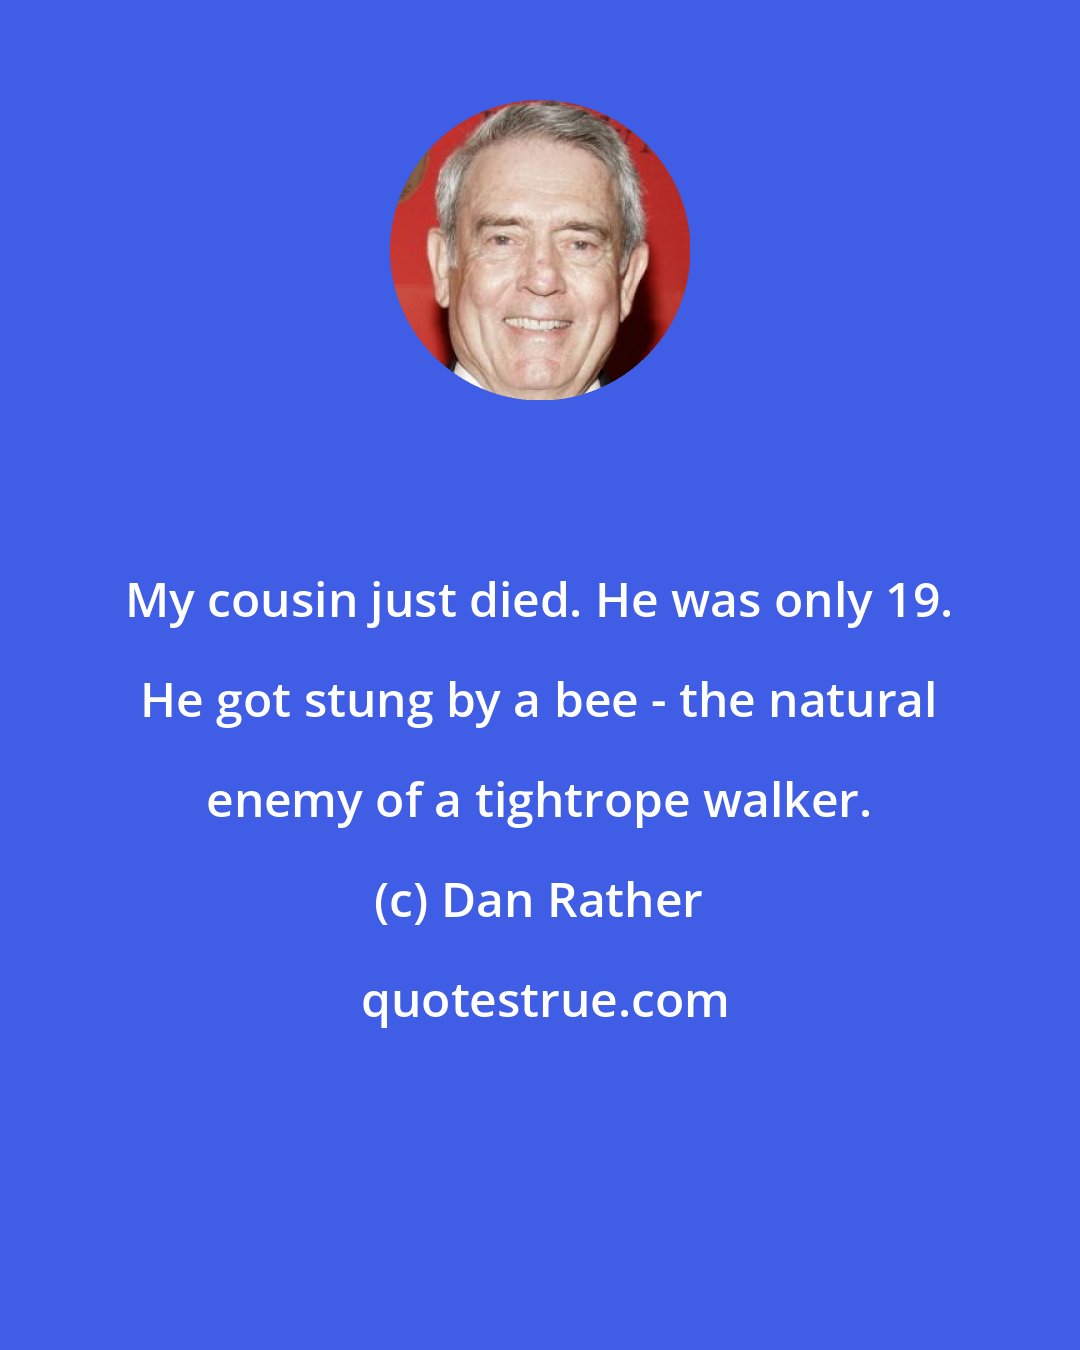 Dan Rather: My cousin just died. He was only 19. He got stung by a bee - the natural enemy of a tightrope walker.